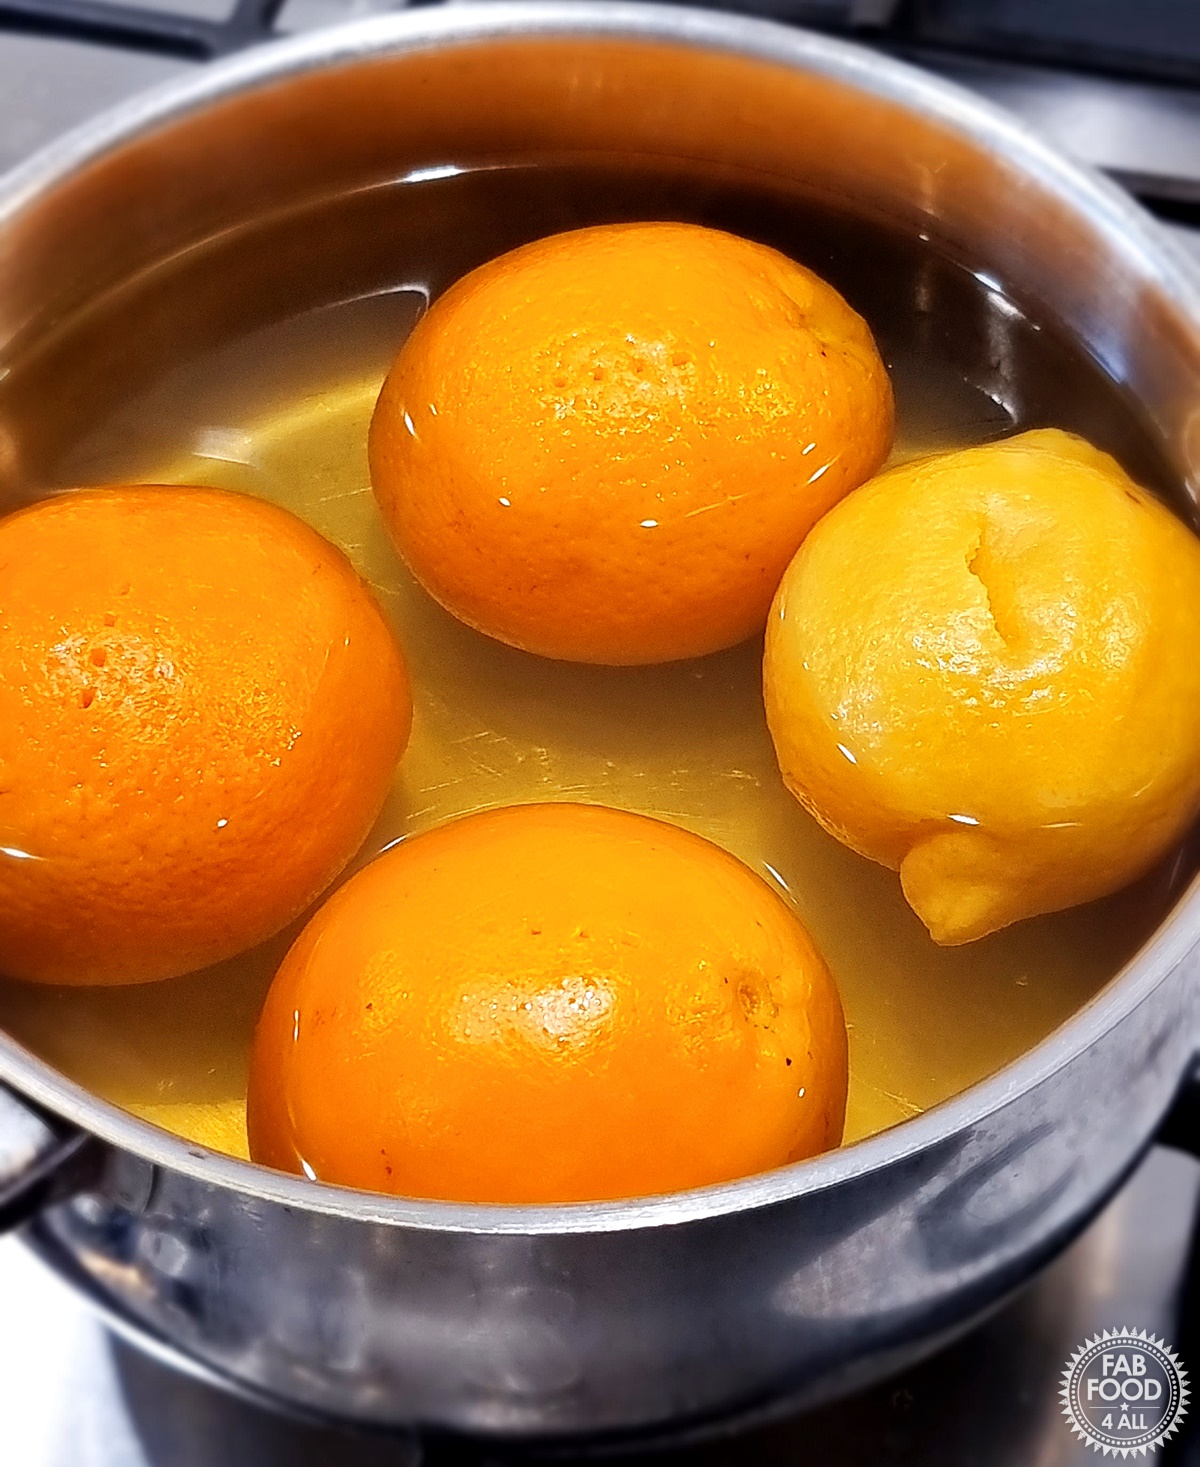 3 oranges and a lemon in a pan of water that have been boiled to soften skins.